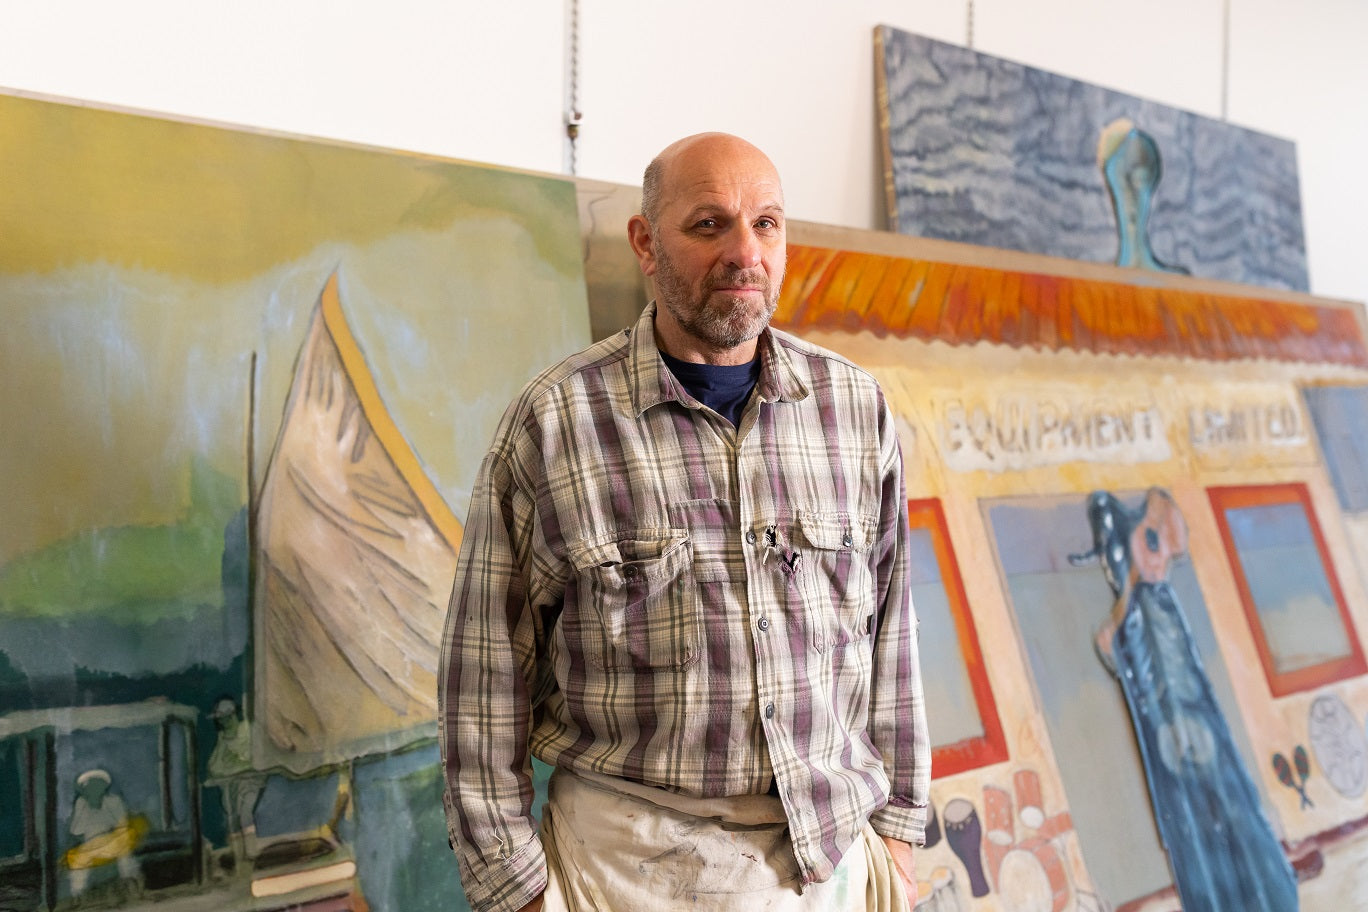 Peter Doig pictured in studio in front of paintings